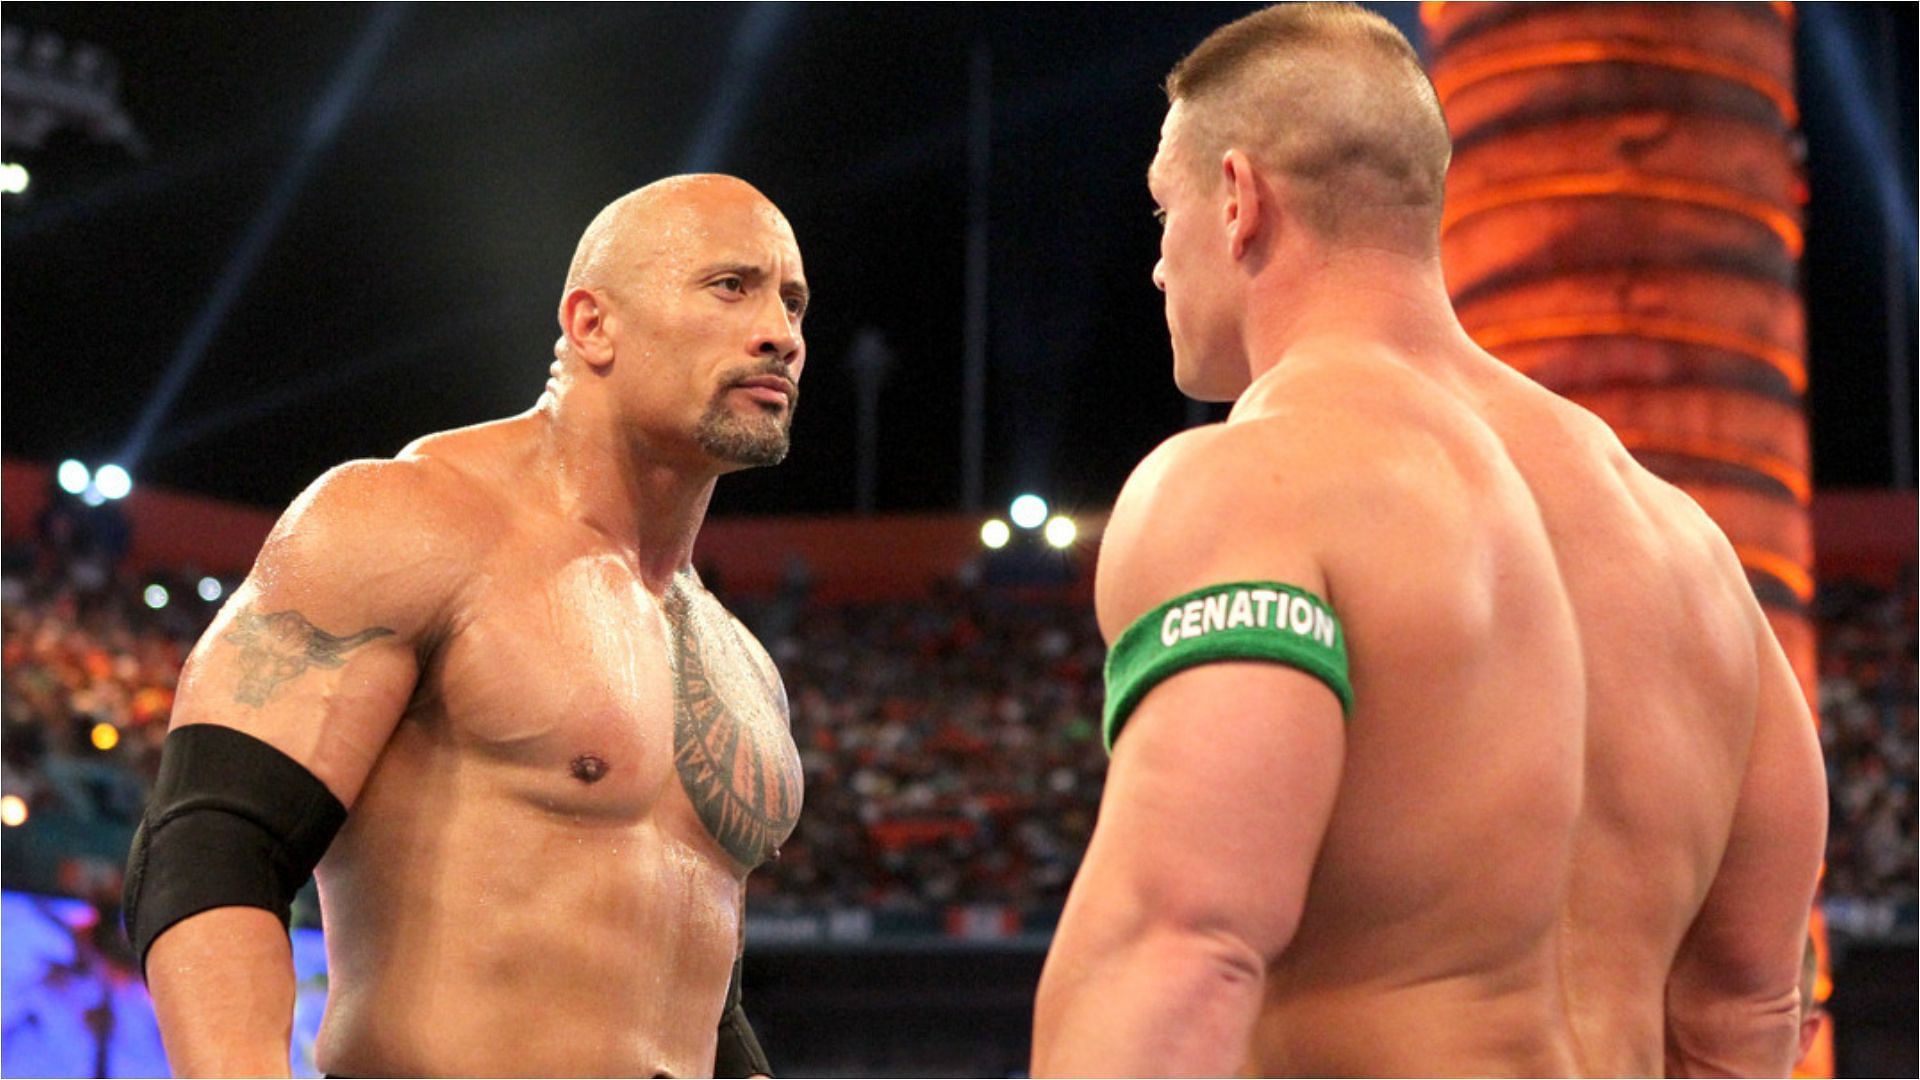 John Cena and The Rock&#039;s respective Hollywood successes put them ahead of the pack